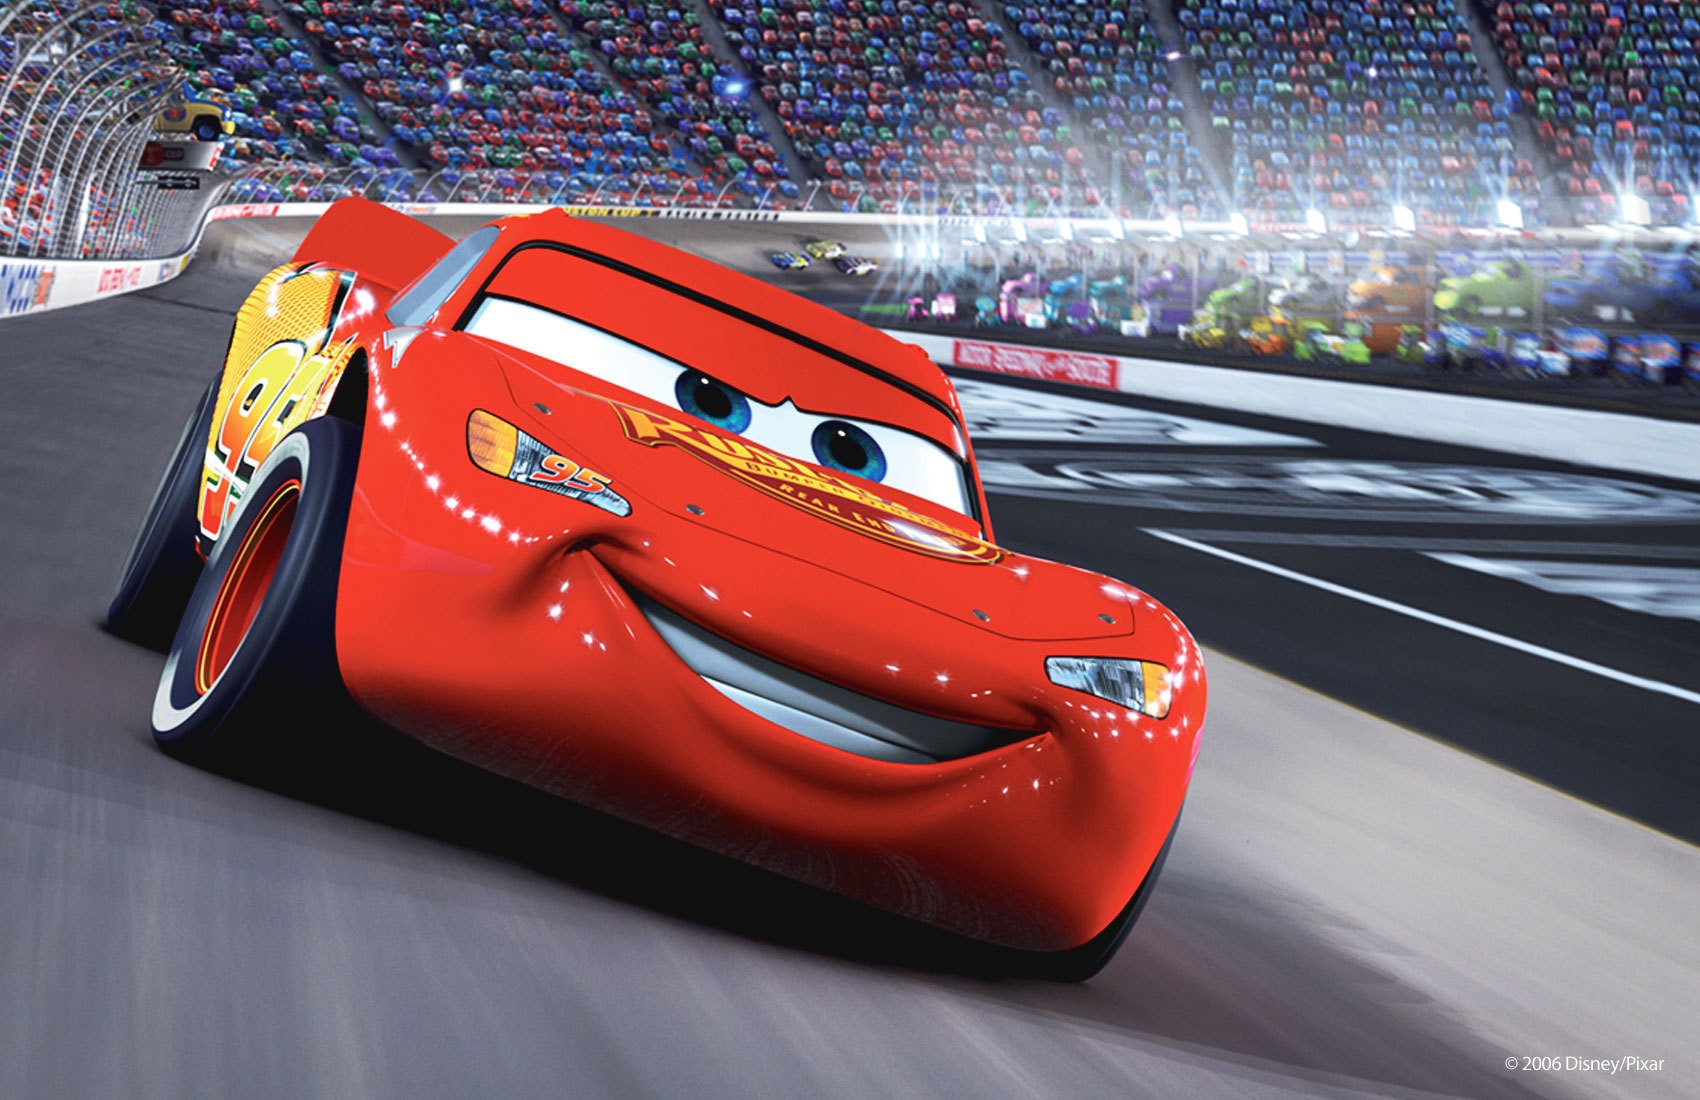 New 'Cars' attraction will open at Disney's Hollywood Studios this March | Blogs1700 x 1100